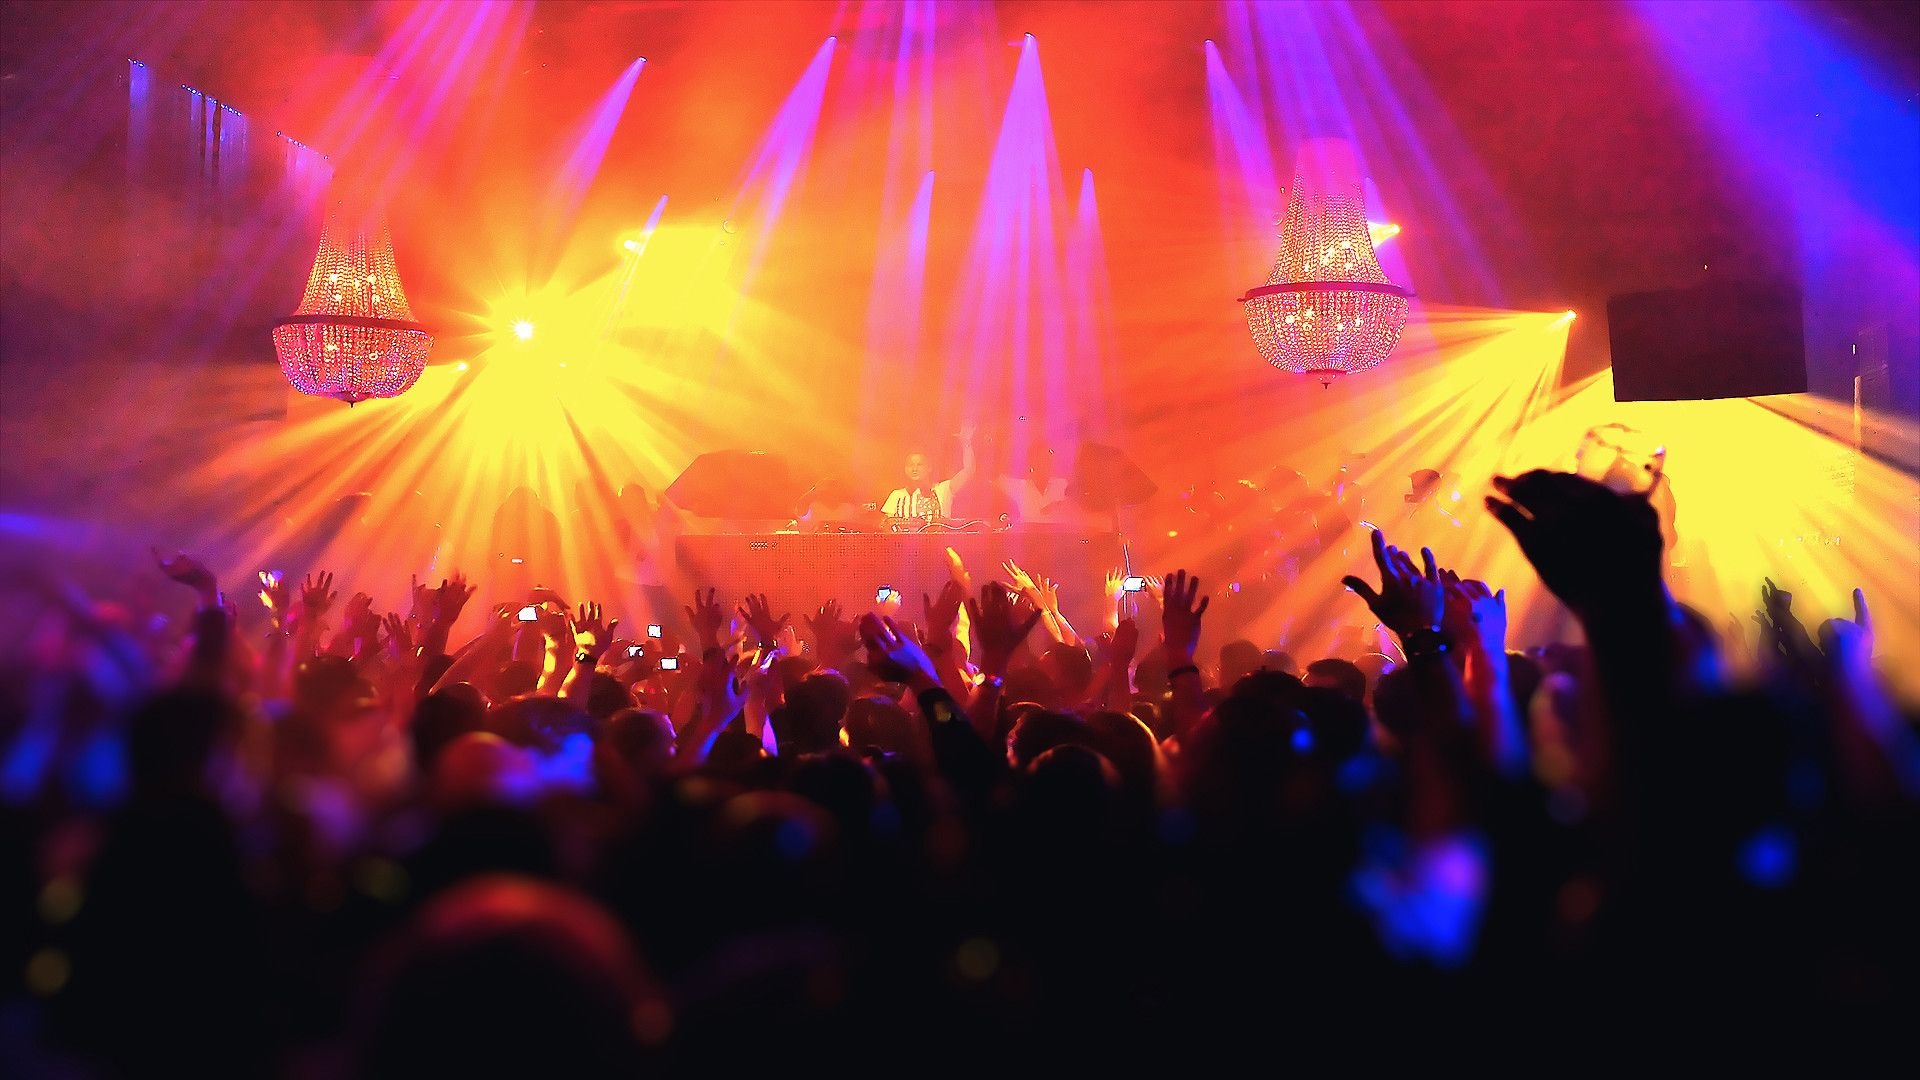 Discotheque: Nightclub, Live concert, Stage performance, Party lights. 1920x1080 Full HD Background.